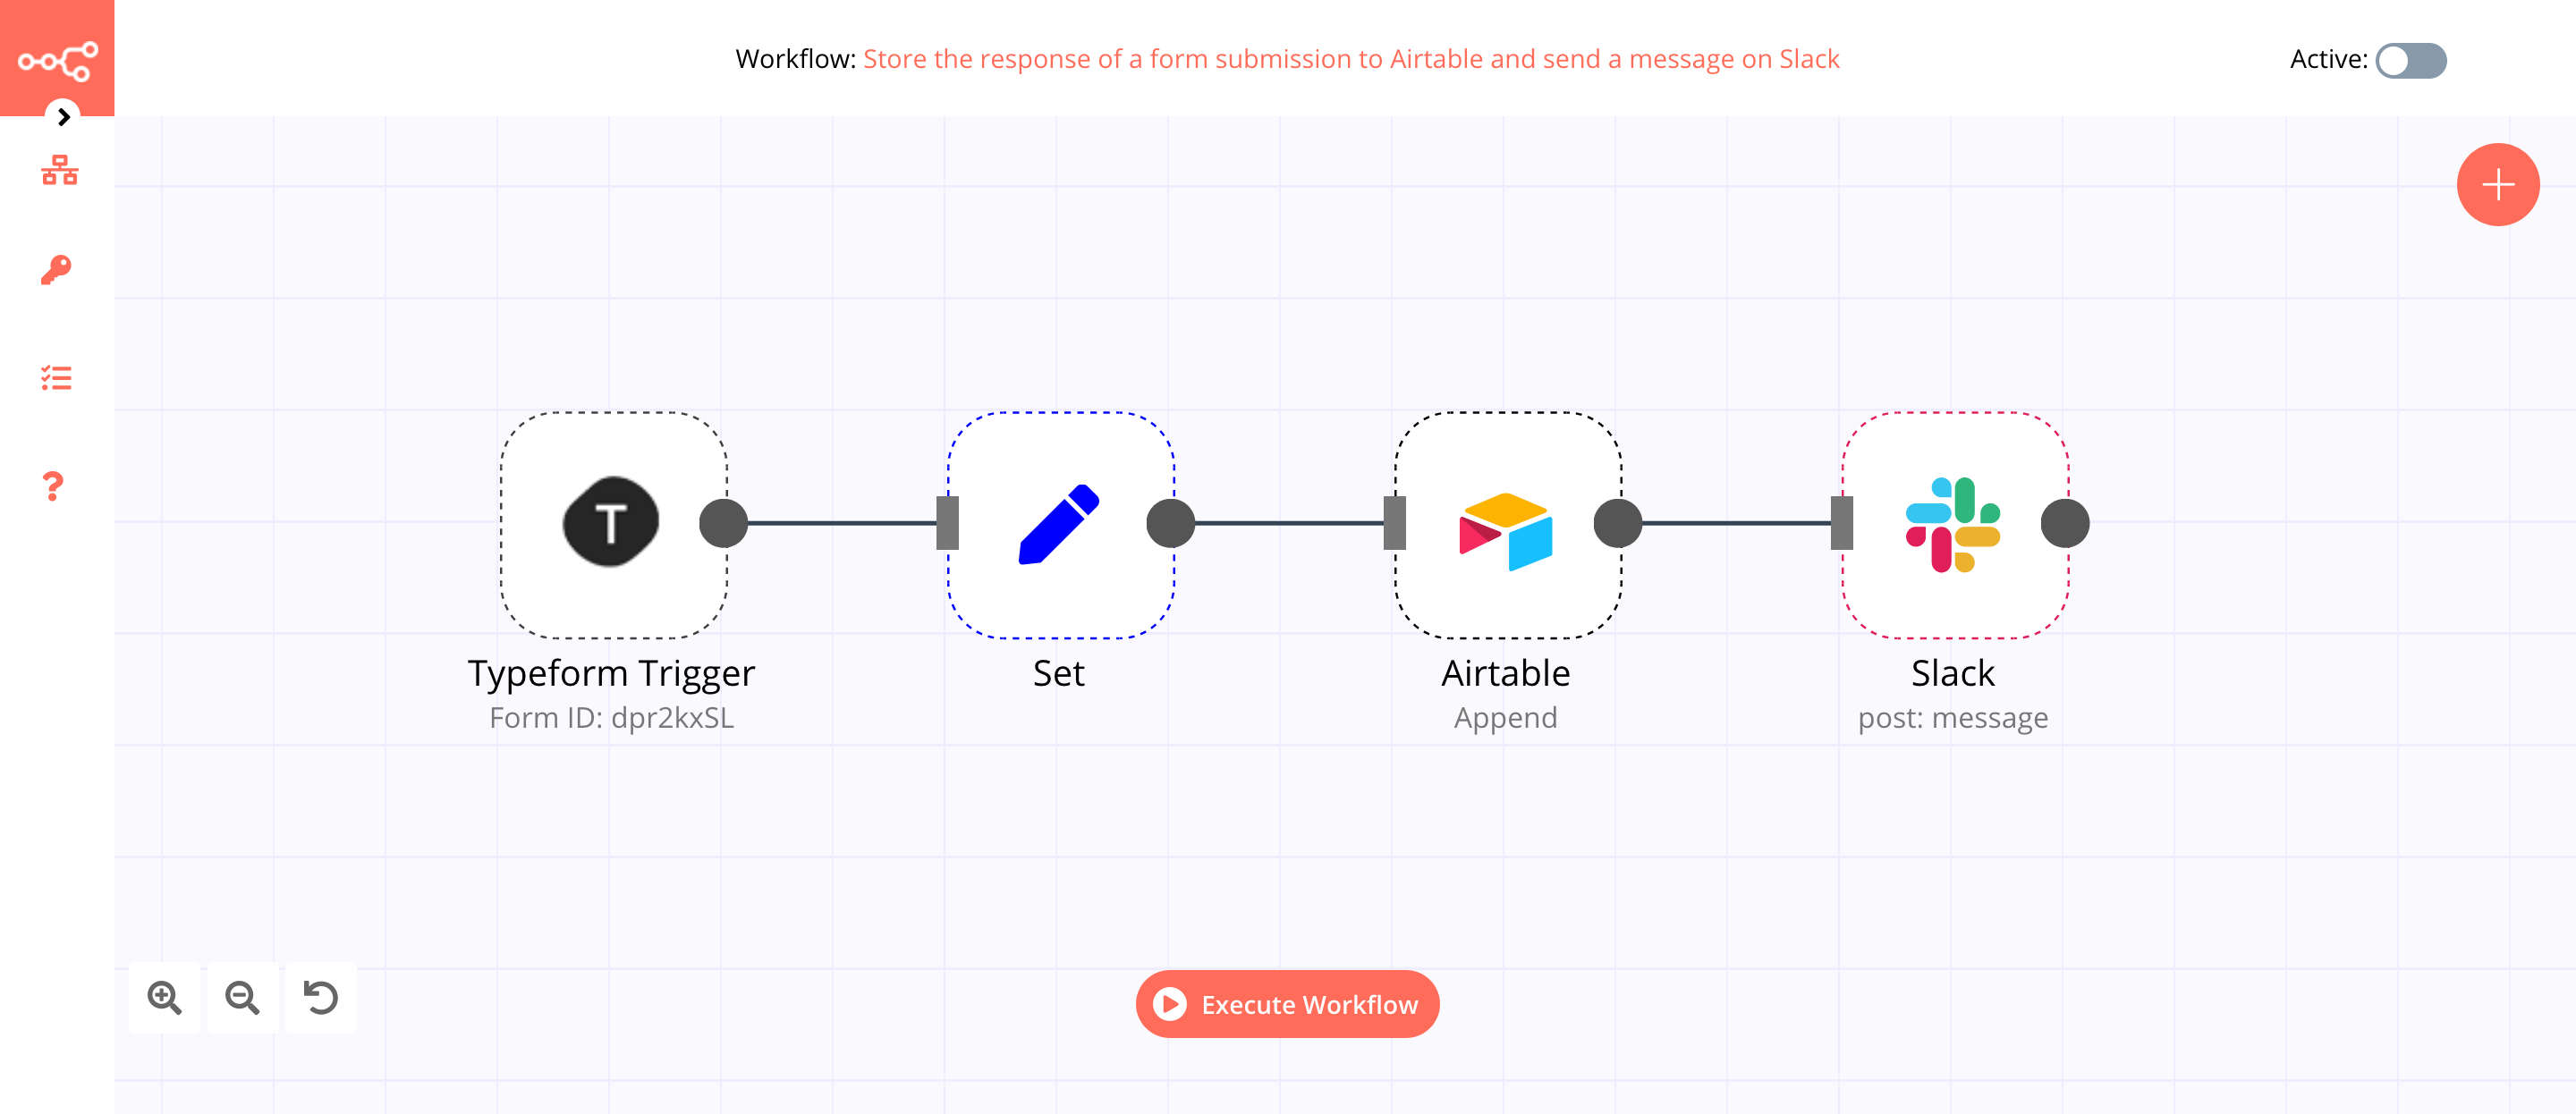 A workflow with the Typeform Trigger node